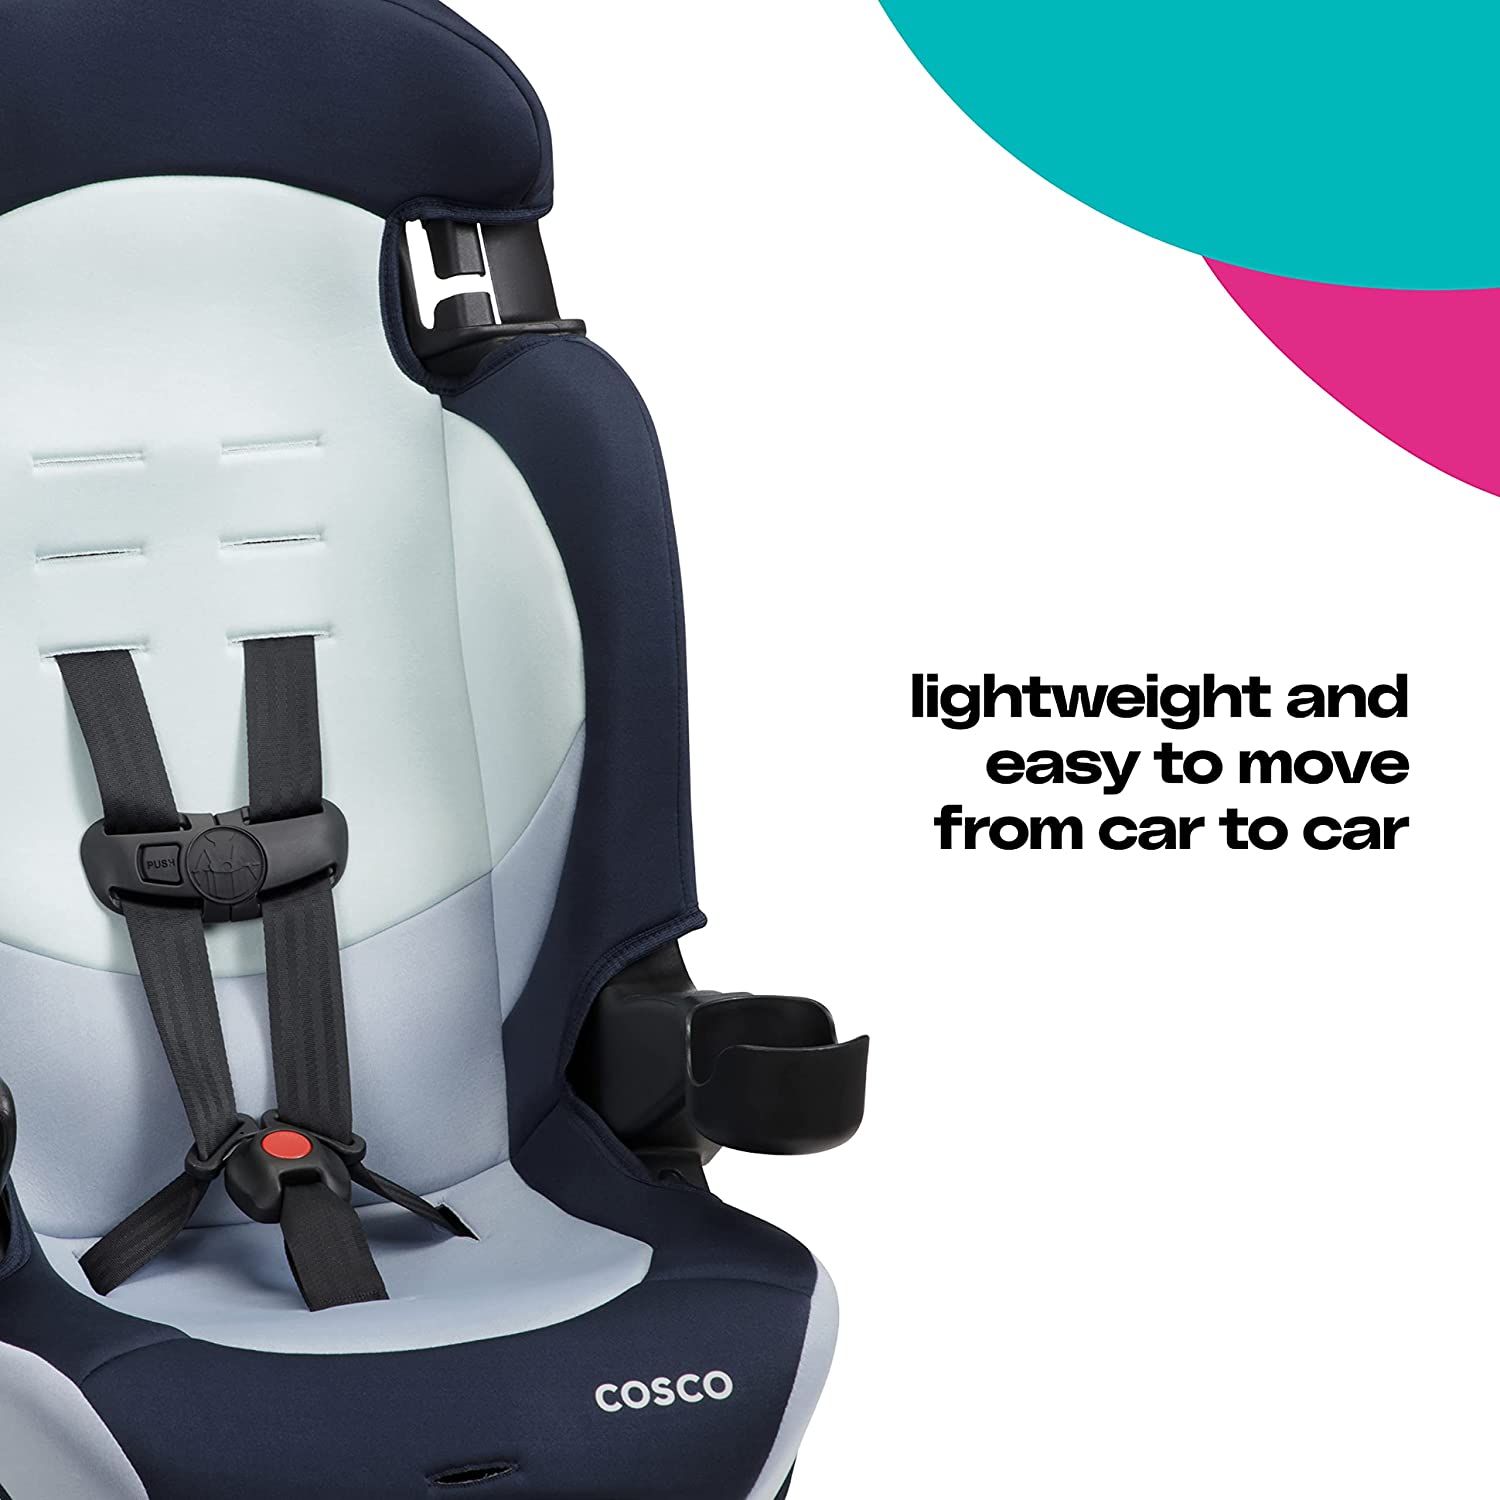 Cosco Finale DX 2-in-1 Booster Car Seat, Rainbow, Toddler - image 2 of 8